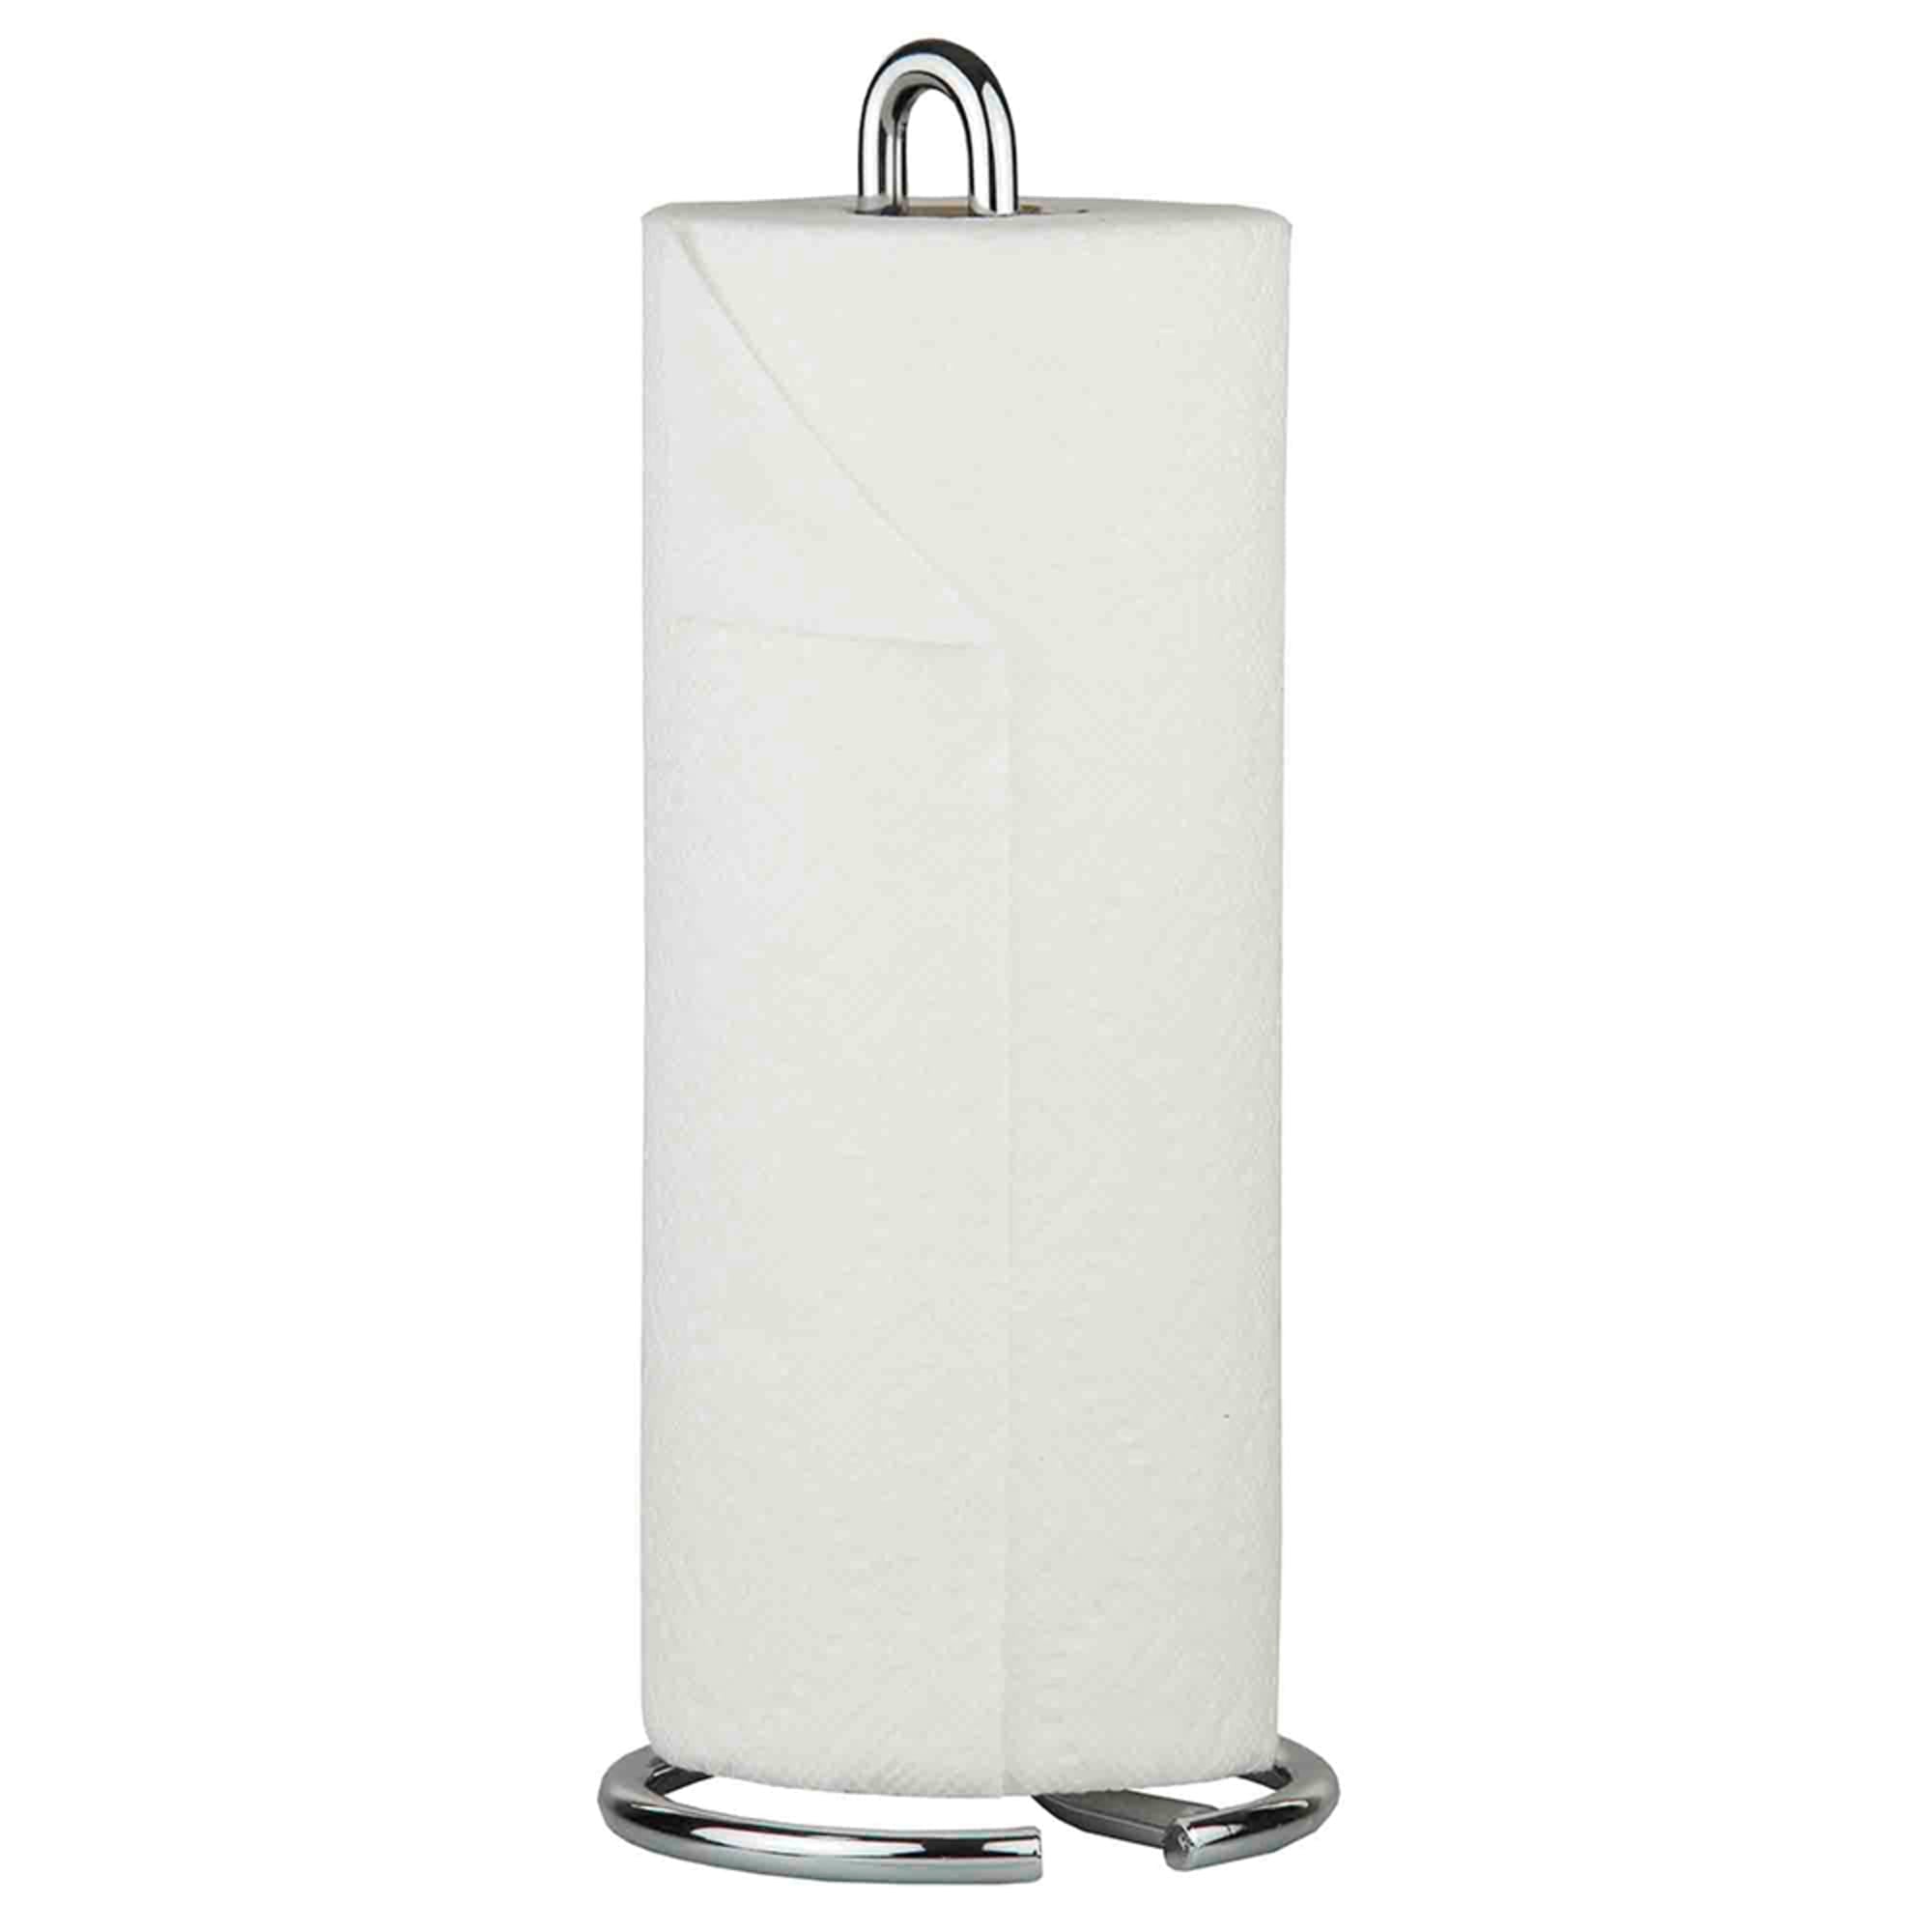 Home Basics Simplicity Collection Free-Standing Paper Towel Holder, Chrome $5.00 EACH, CASE PACK OF 12